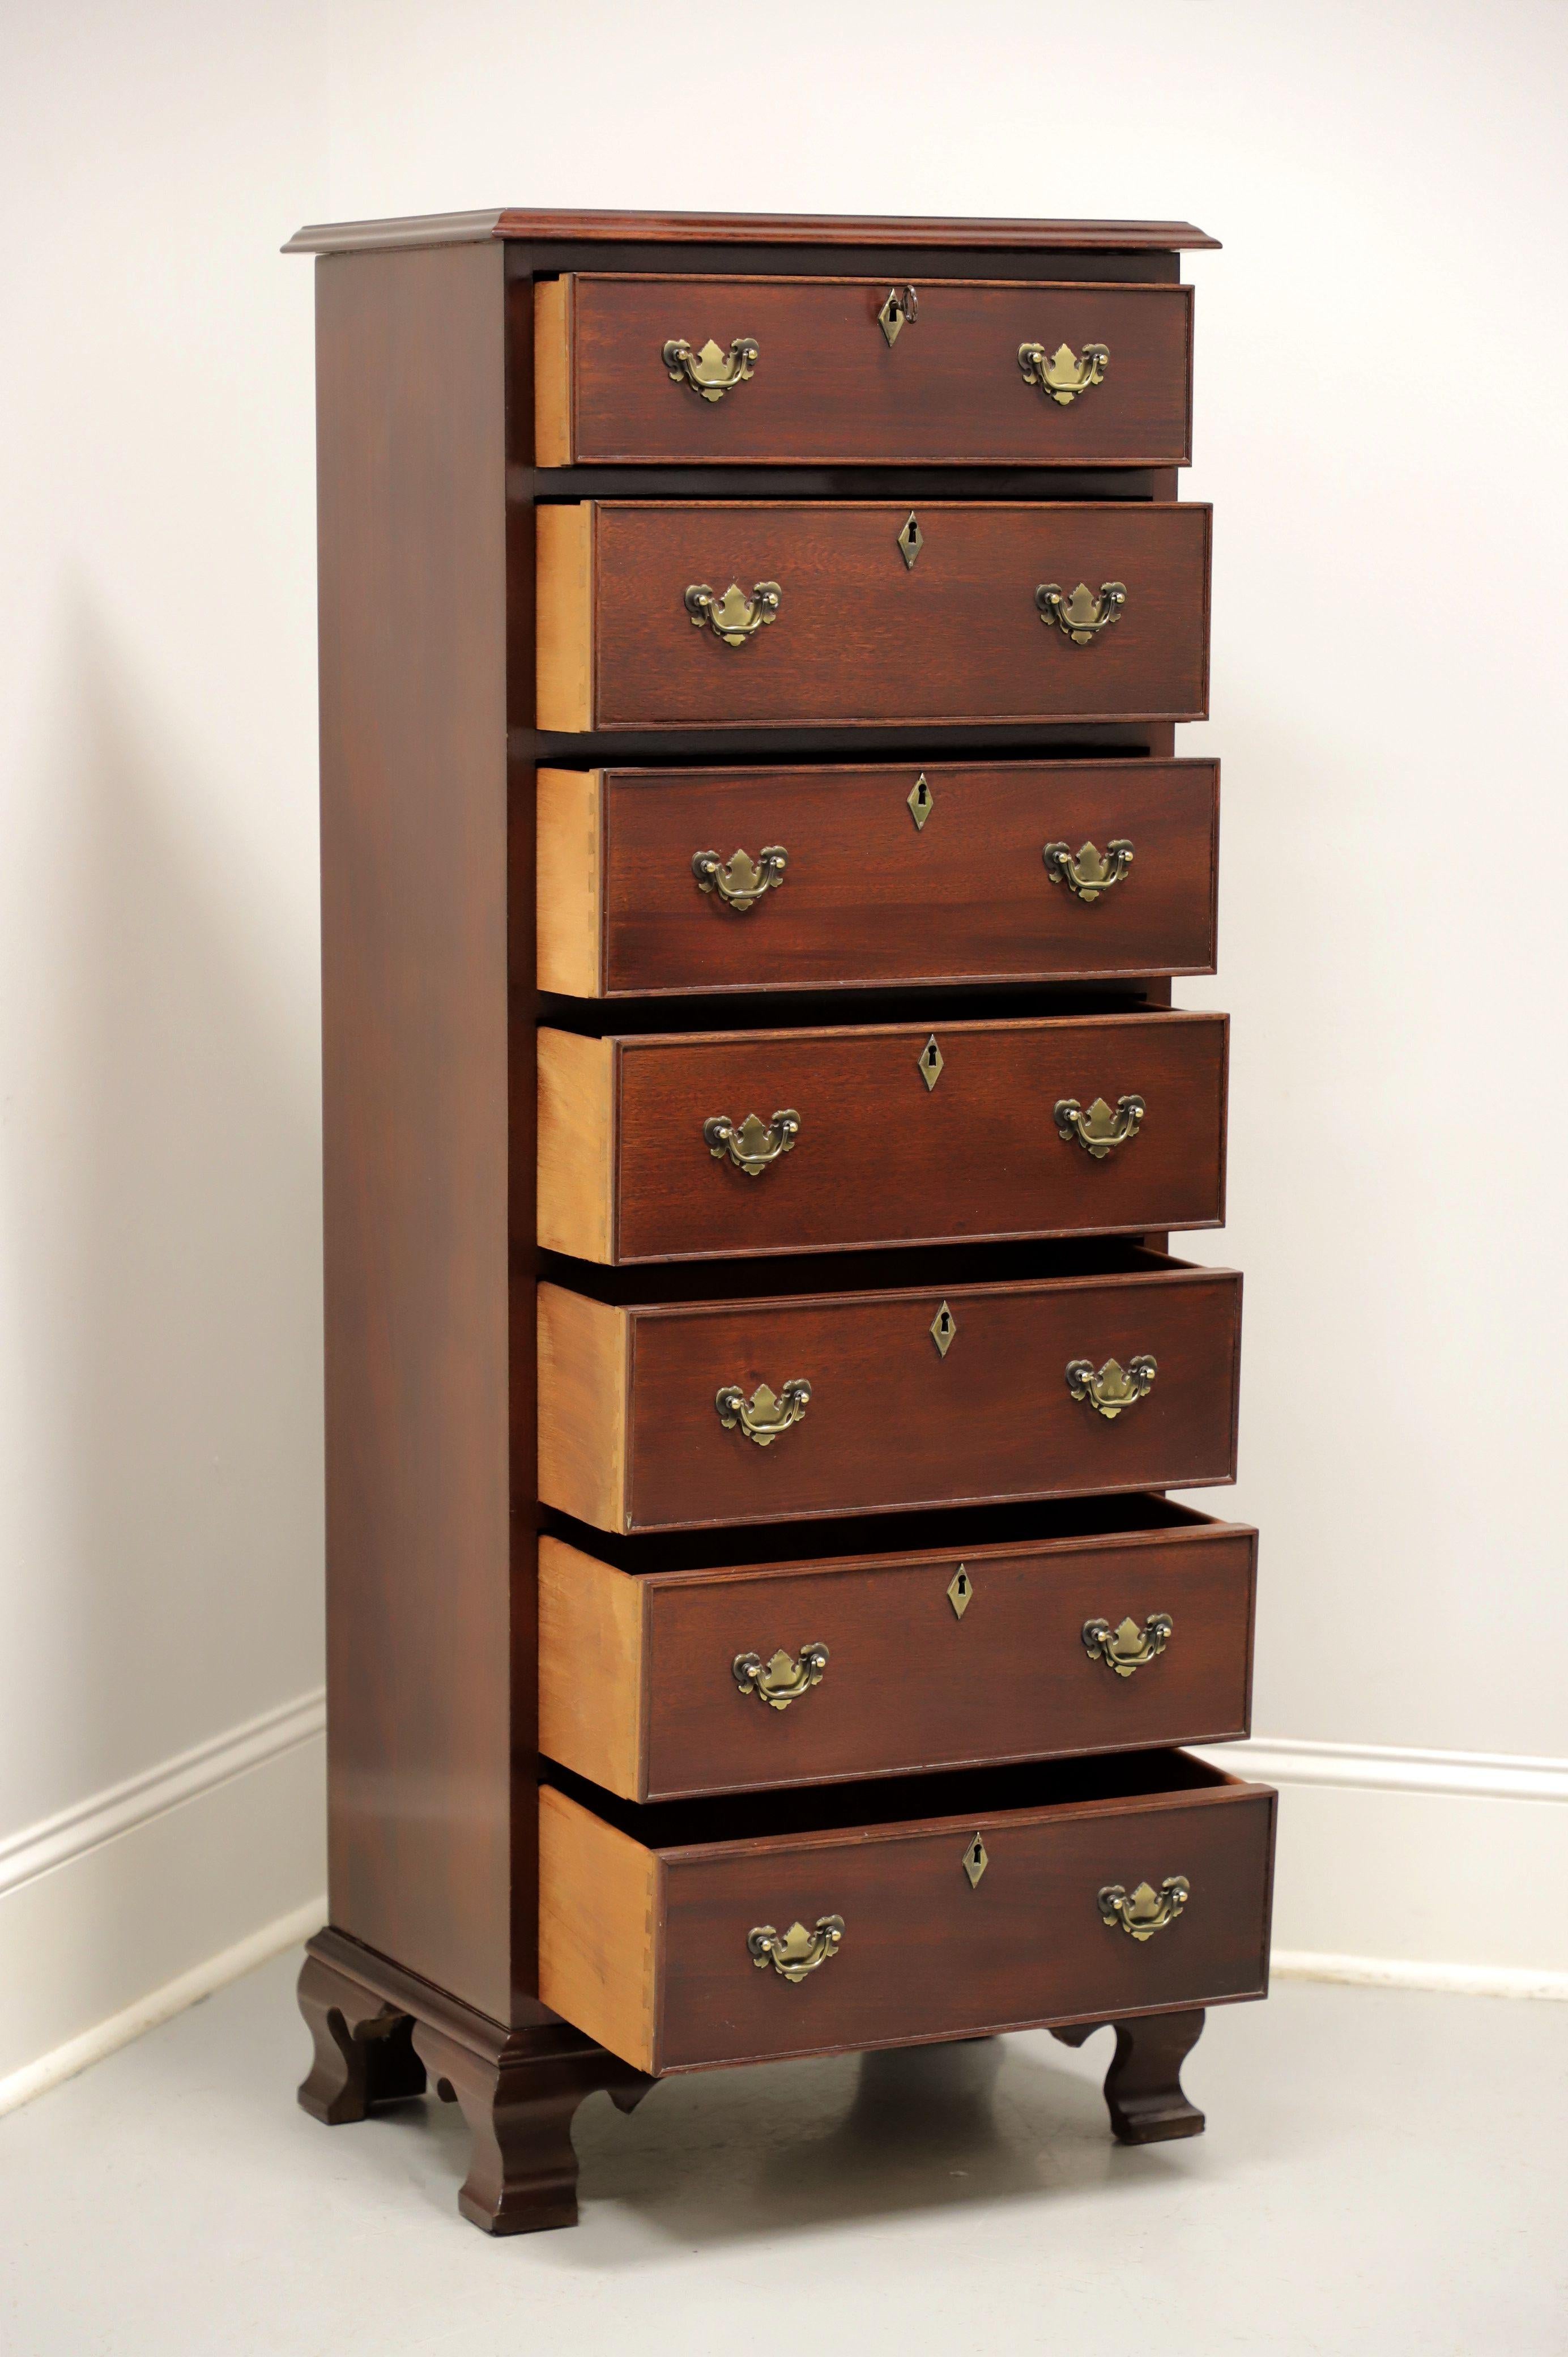 20th Century CRAFTIQUE Solid Mahogany Chippendale Semainier Lingerie Chest with Ogee Feet